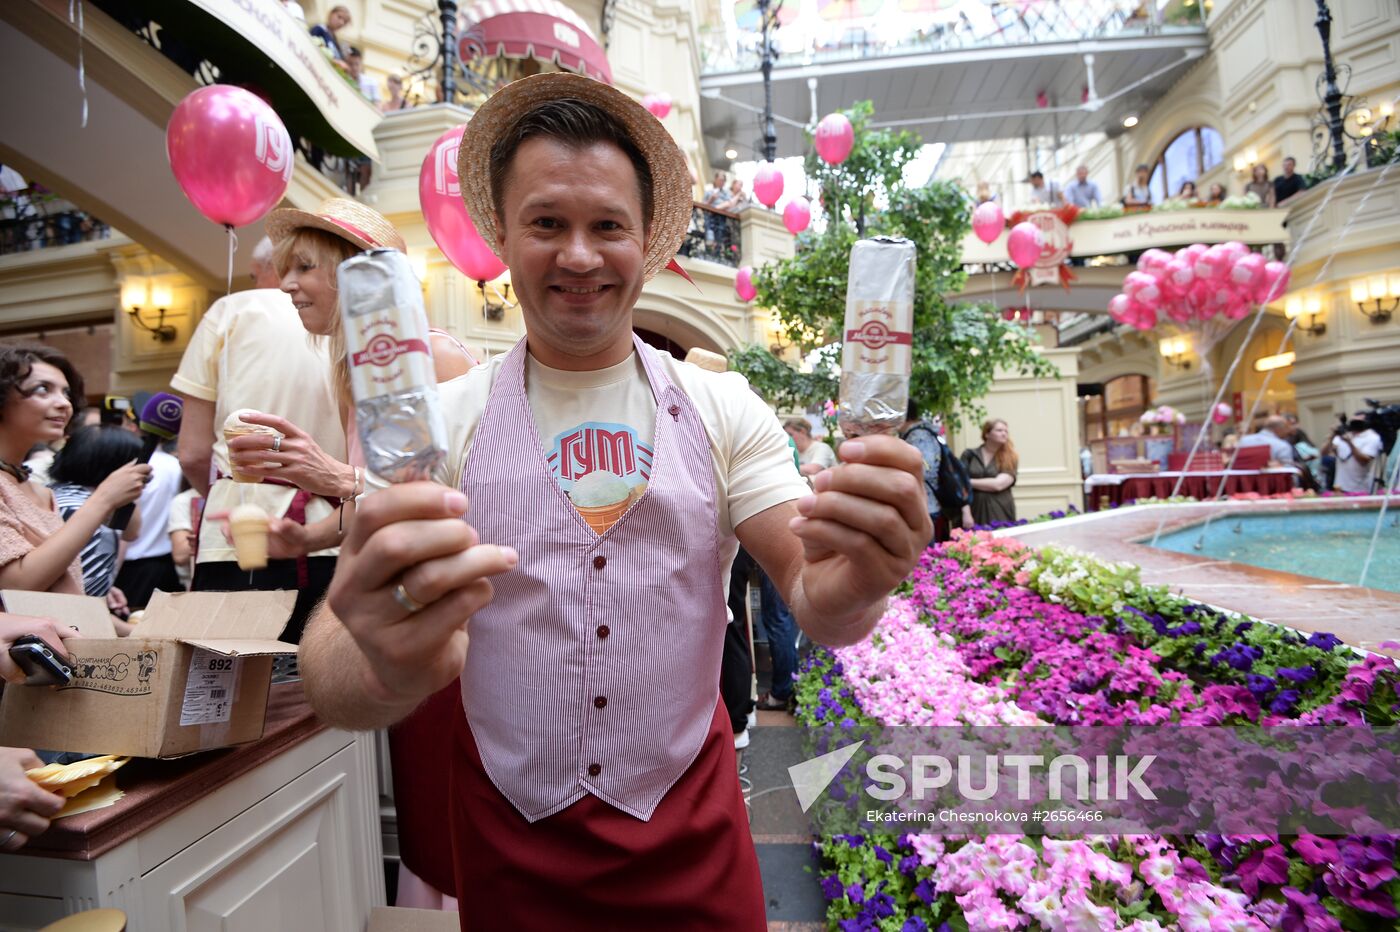 Ice-cream celebrations at Moscow GUM Department Store